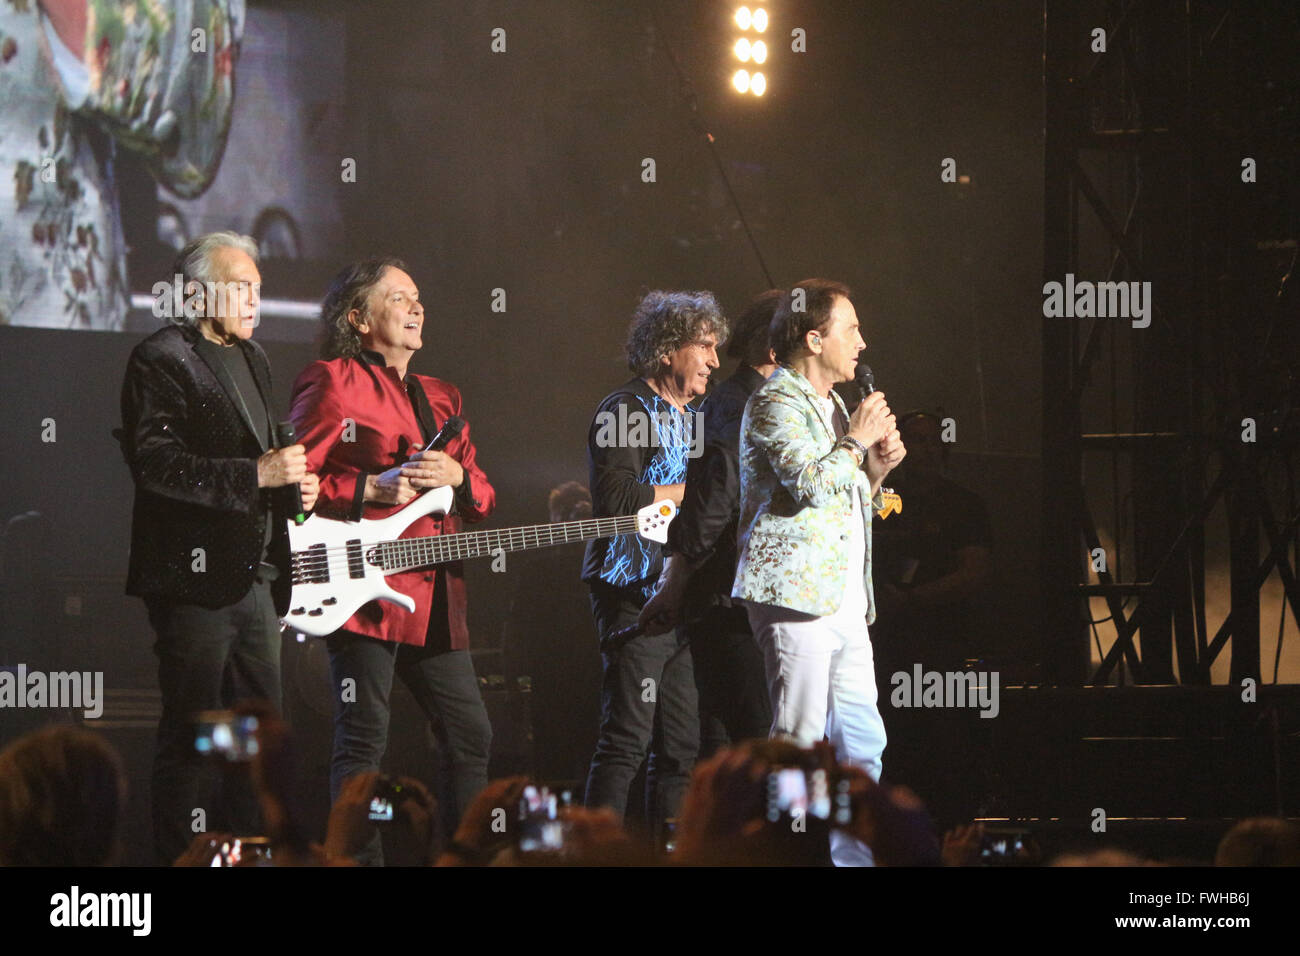 Milan, Italy. 11th Jun, 2016. Italian rock band Pooh on stage in Milan, Italy. Credit:  Luca Quadrio/Alamy Live News. Stock Photo